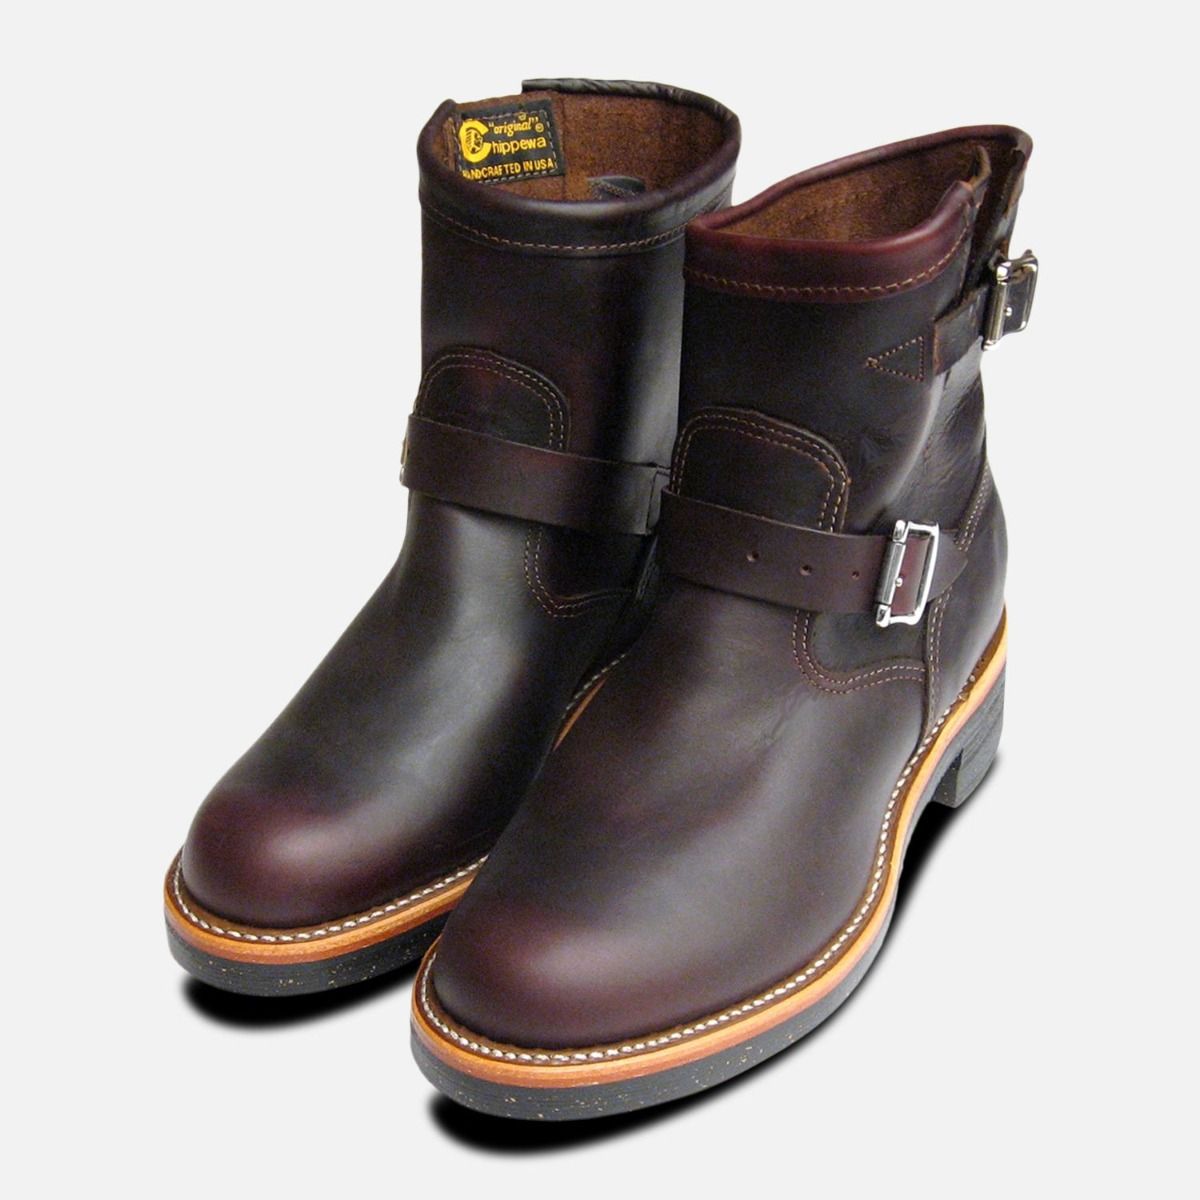 logger boots with vibram soles